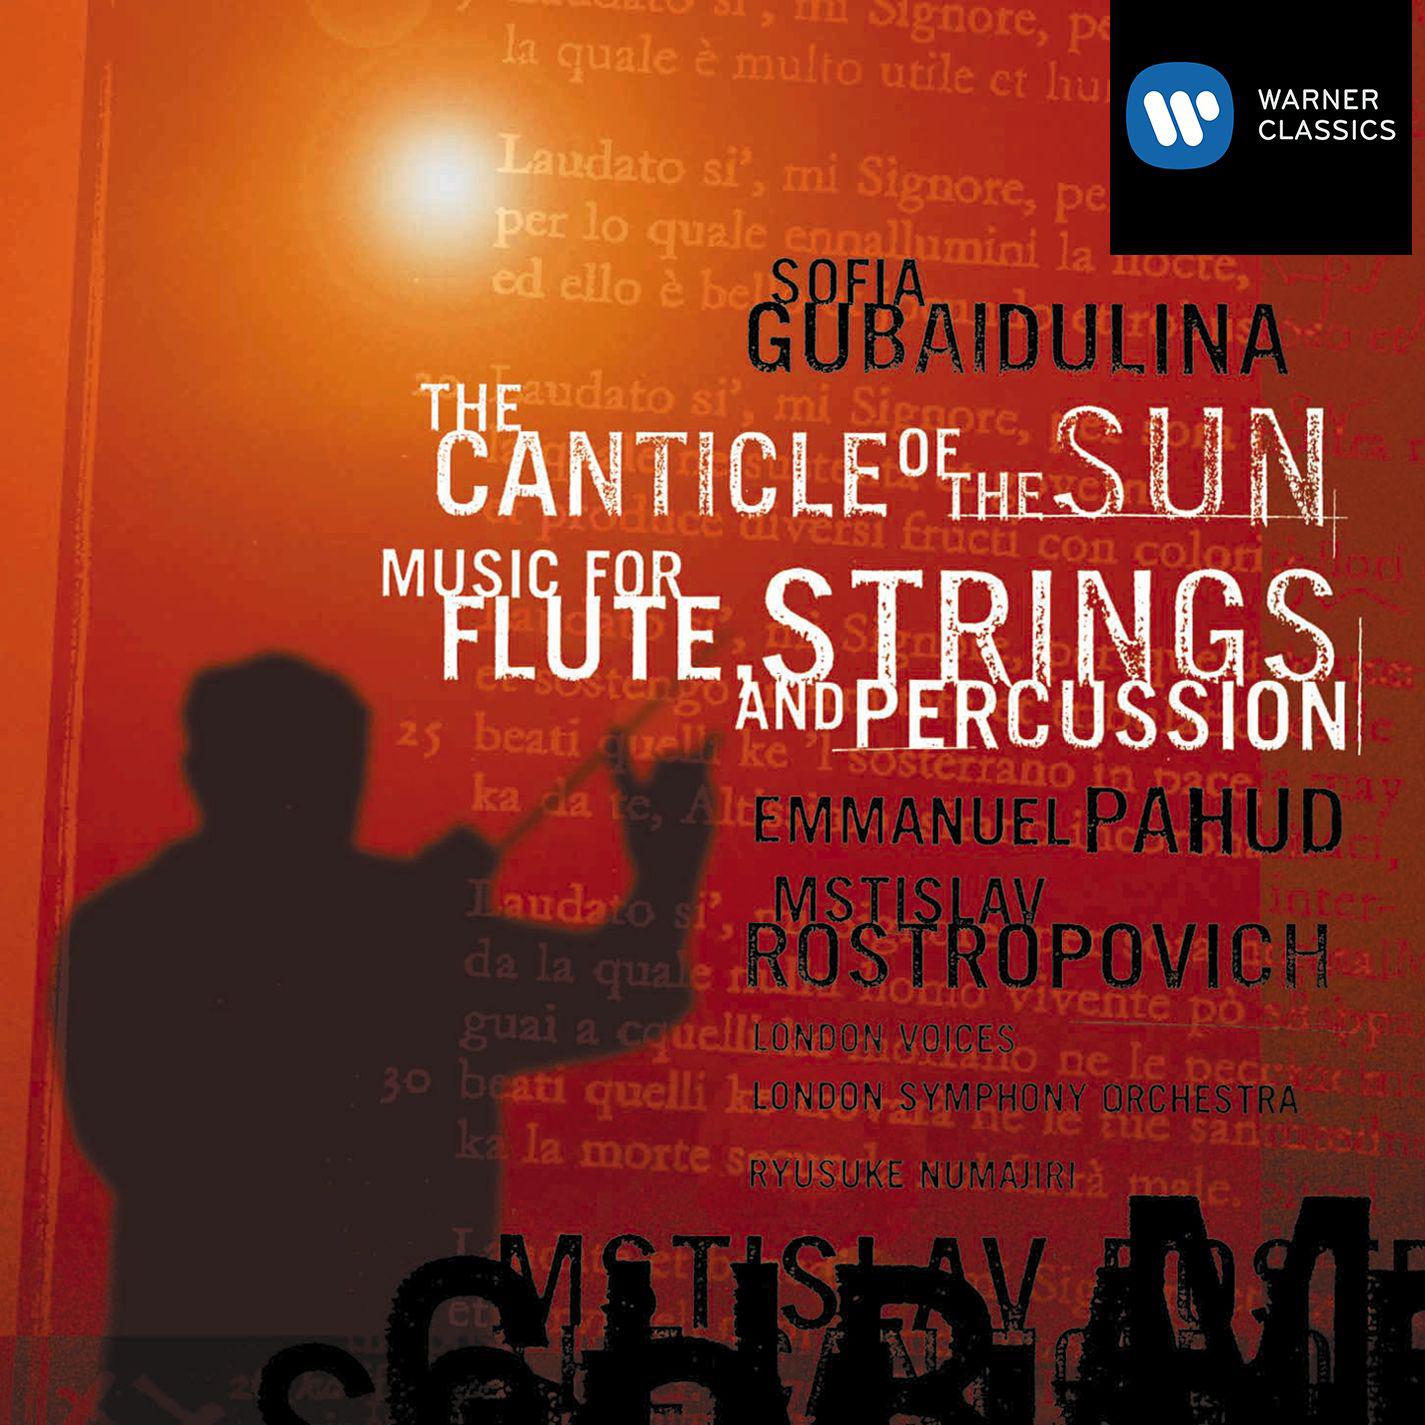 Gubaidulina: The Canticle Of The Sun, Music For Flute Strings And Percussion